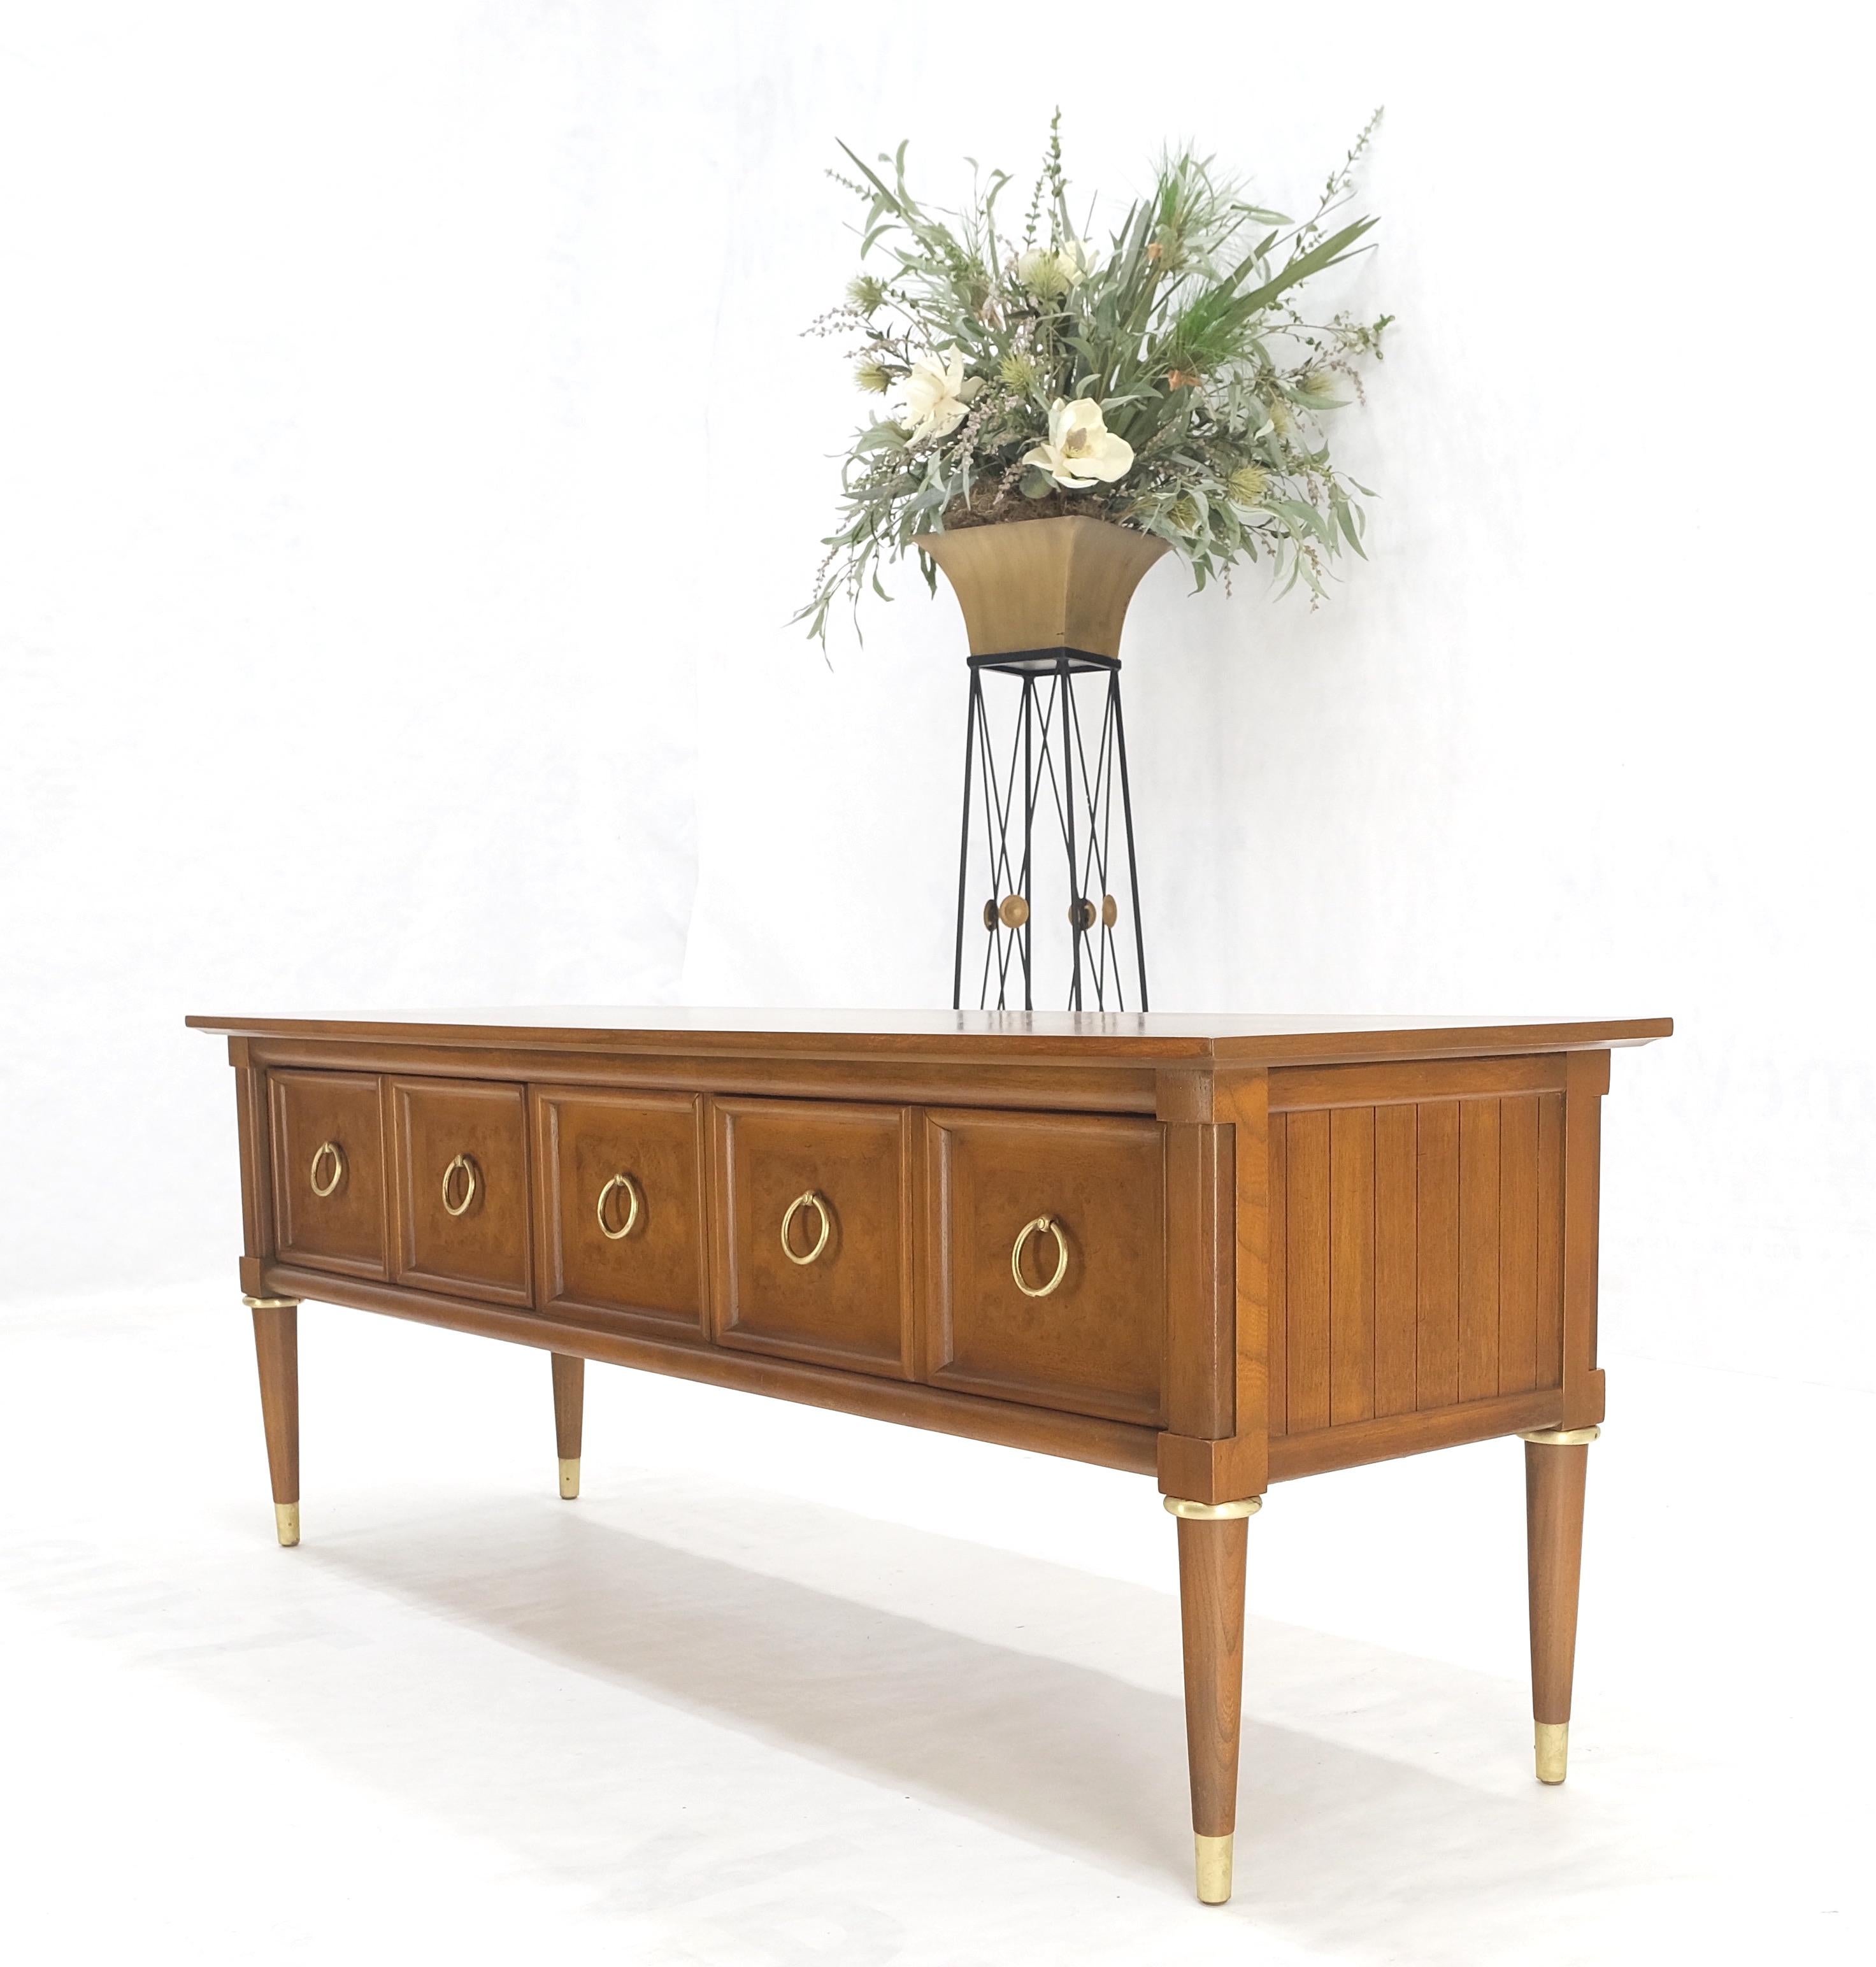 Light Walnut Brass Drop Rings Pulls Low Profile Tapered Legs Long Credenza Mid Century MINT!